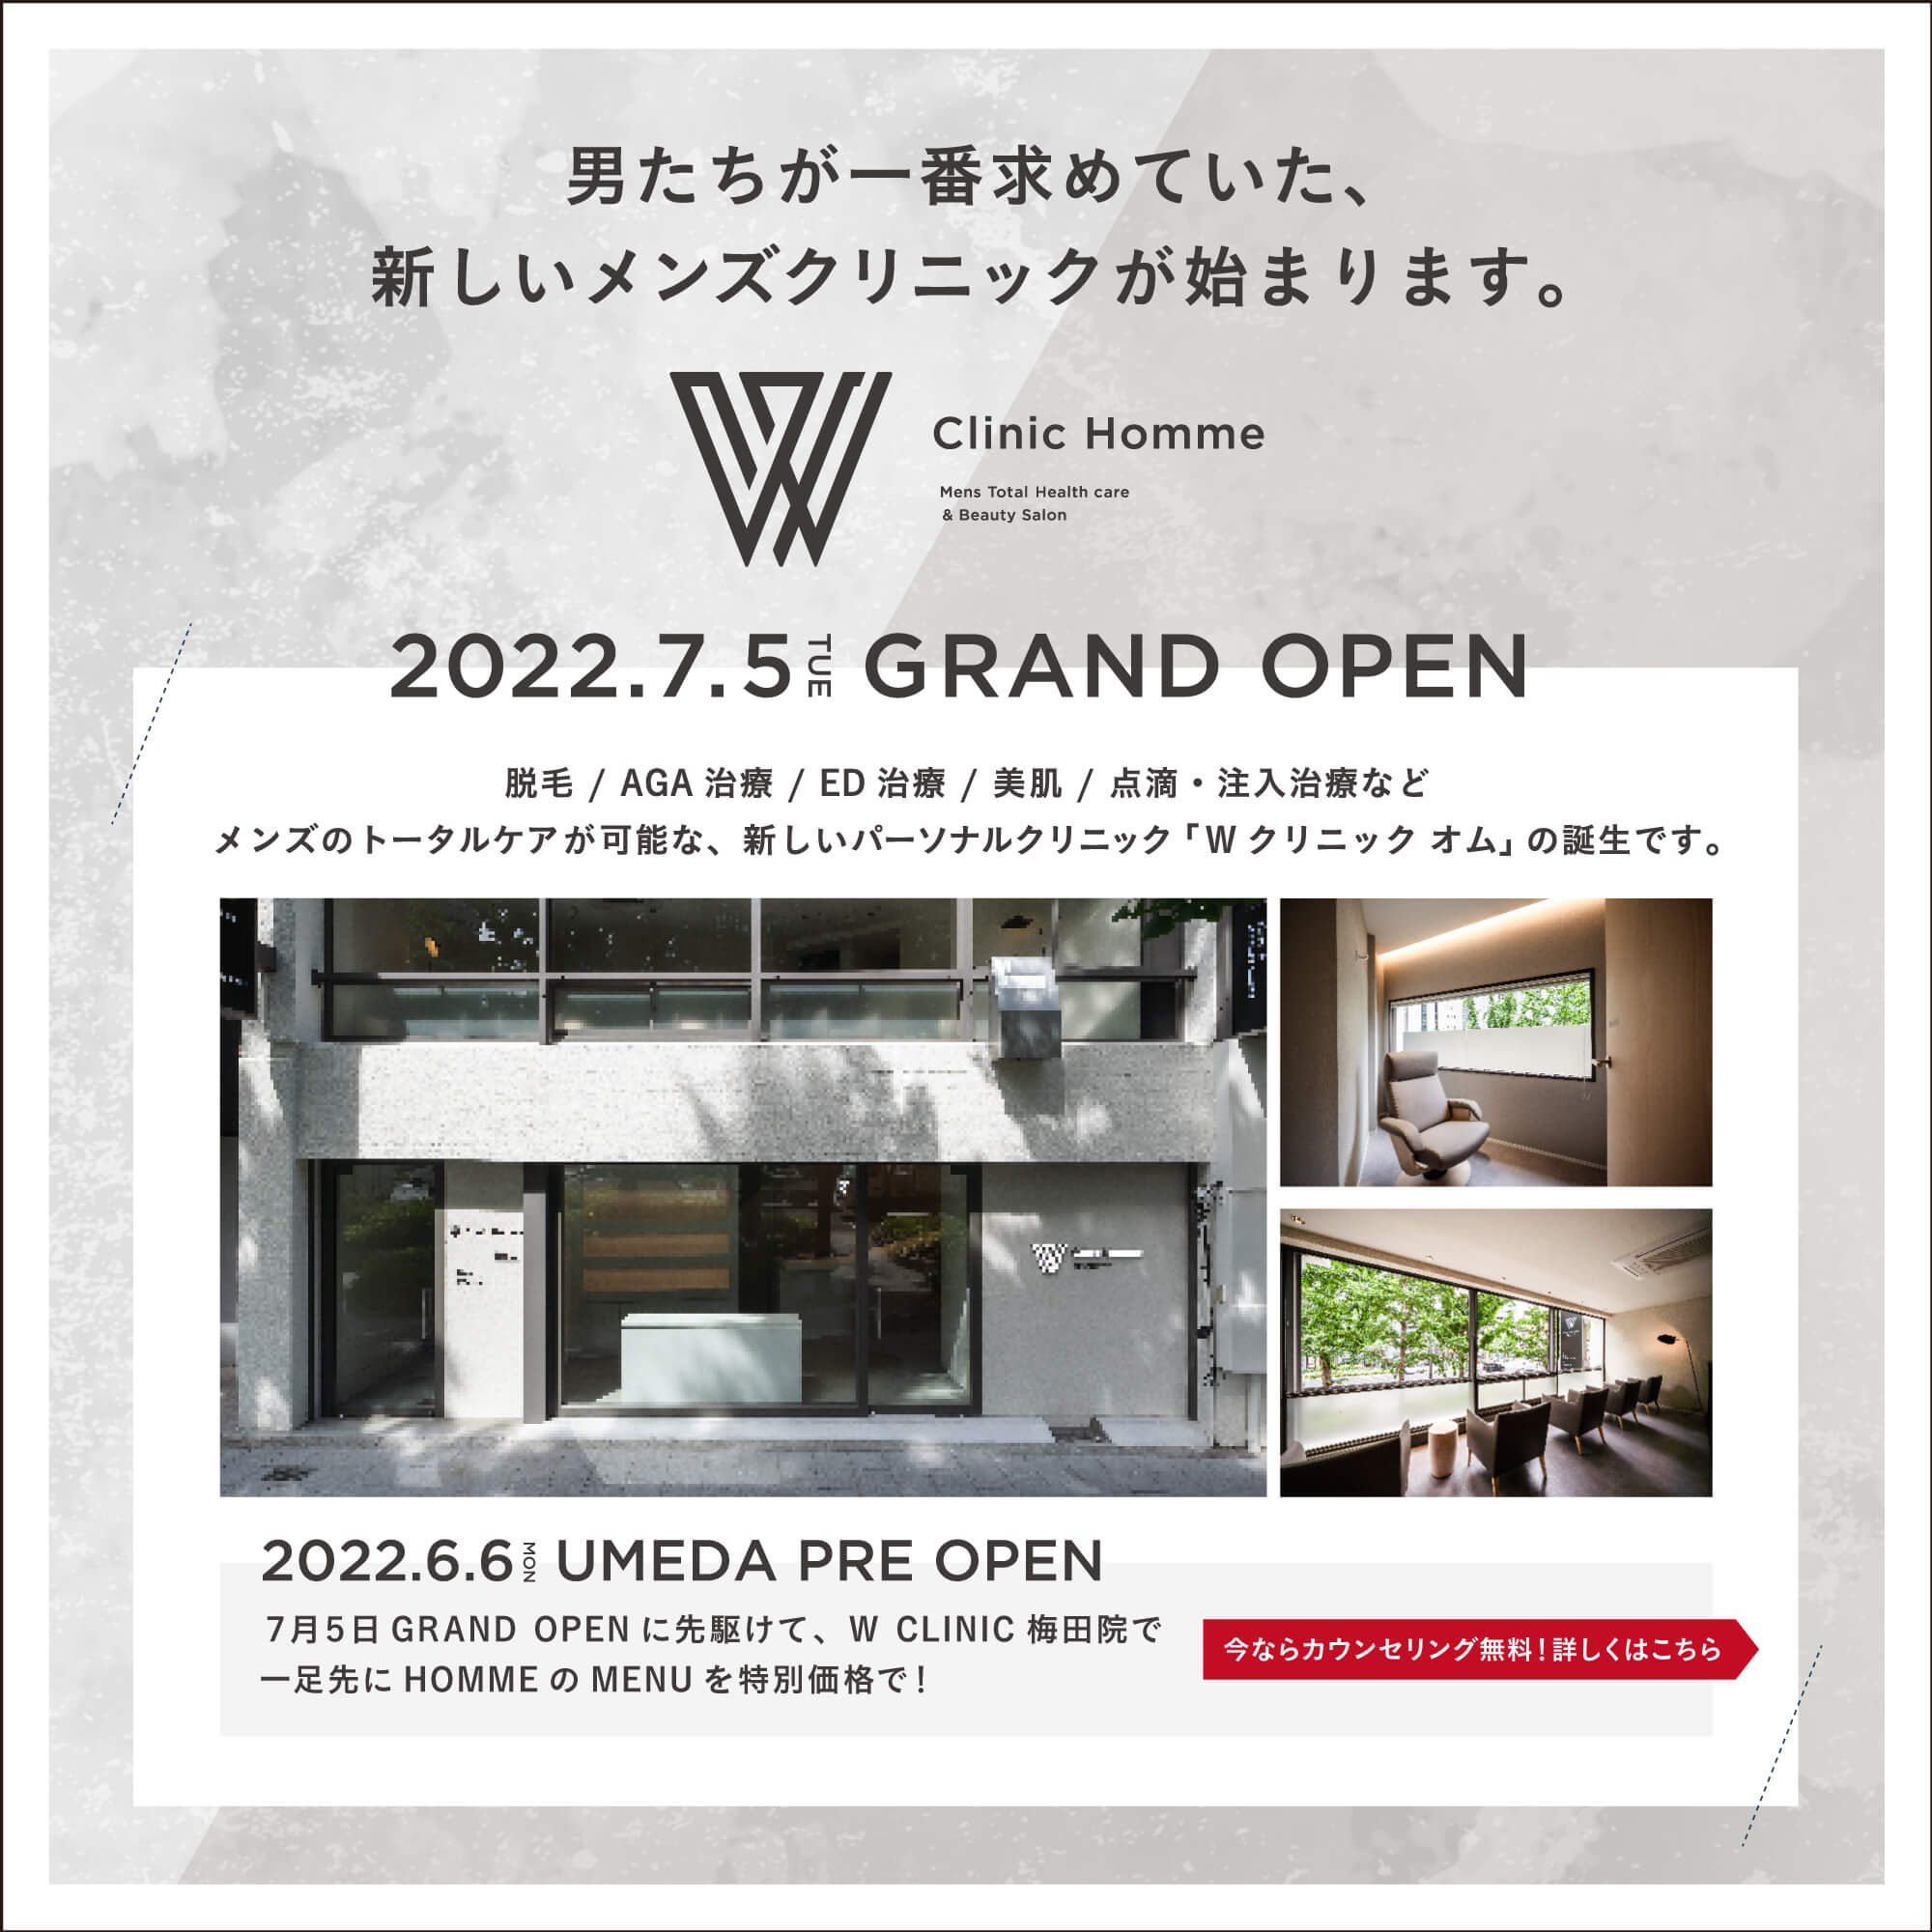 W Clinic Homme 2022/07/05 GRAND OPEN